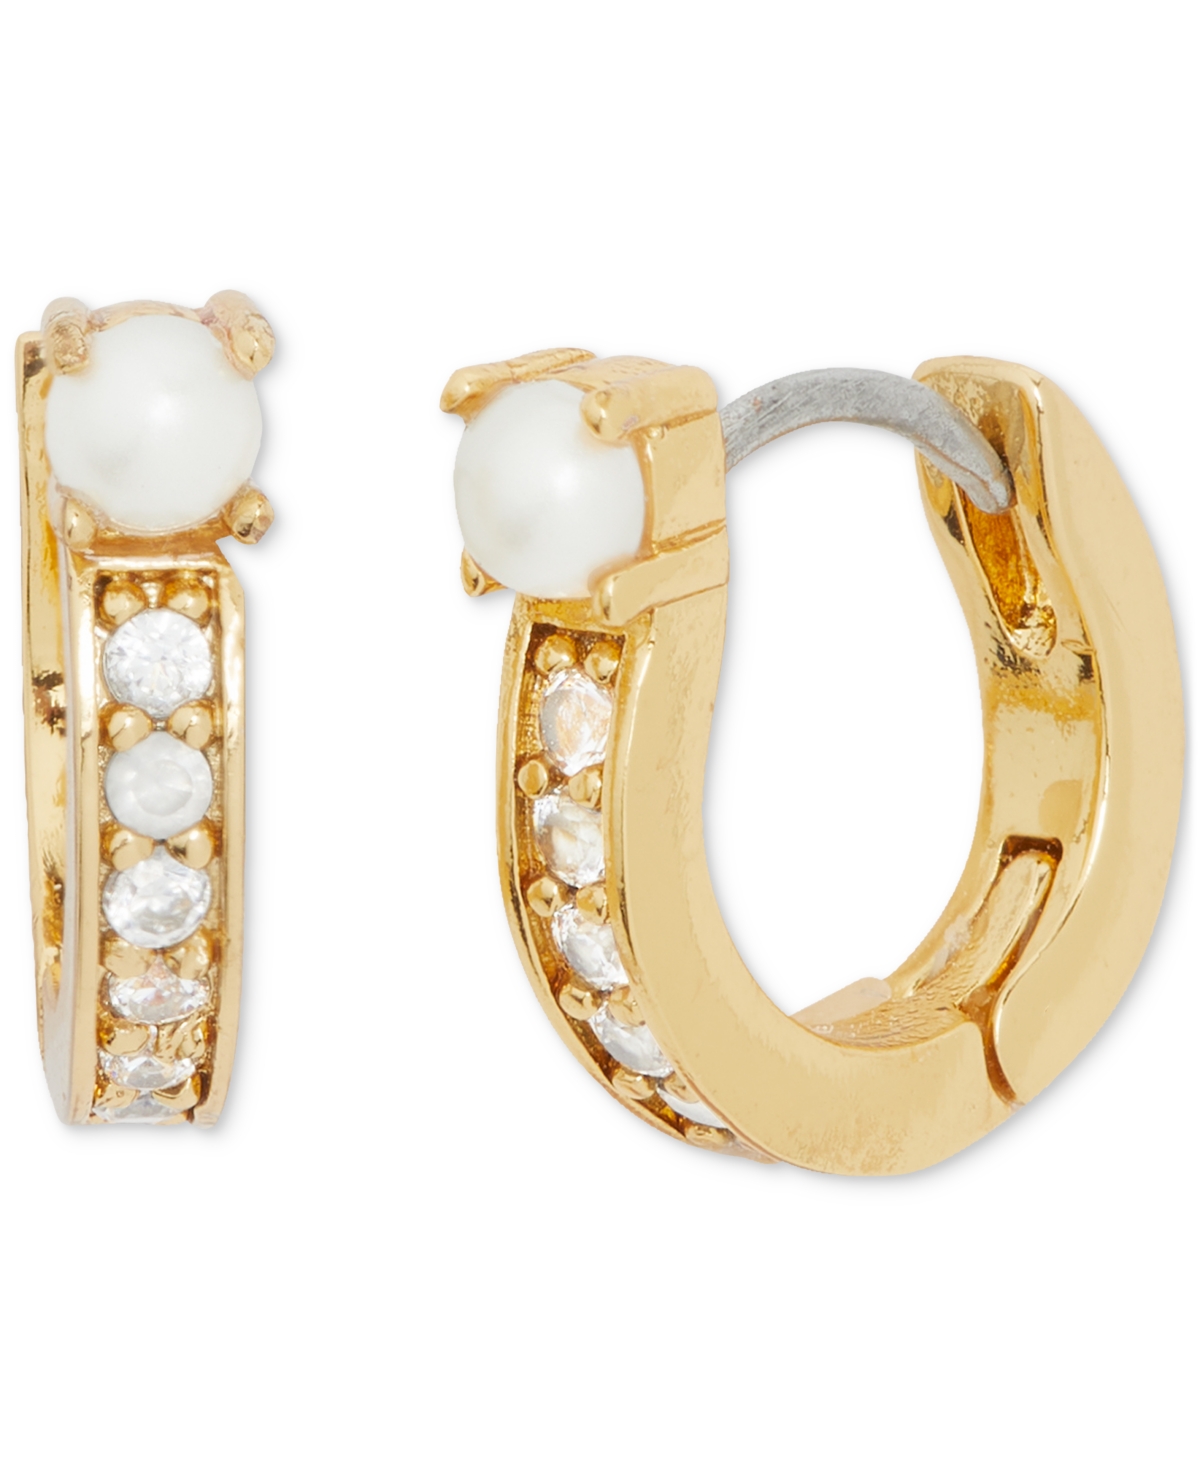 Kate Spade Gold-tone Extra-small Pave & Imitation Pearl Huggie Hoop Earrings, 0.47"